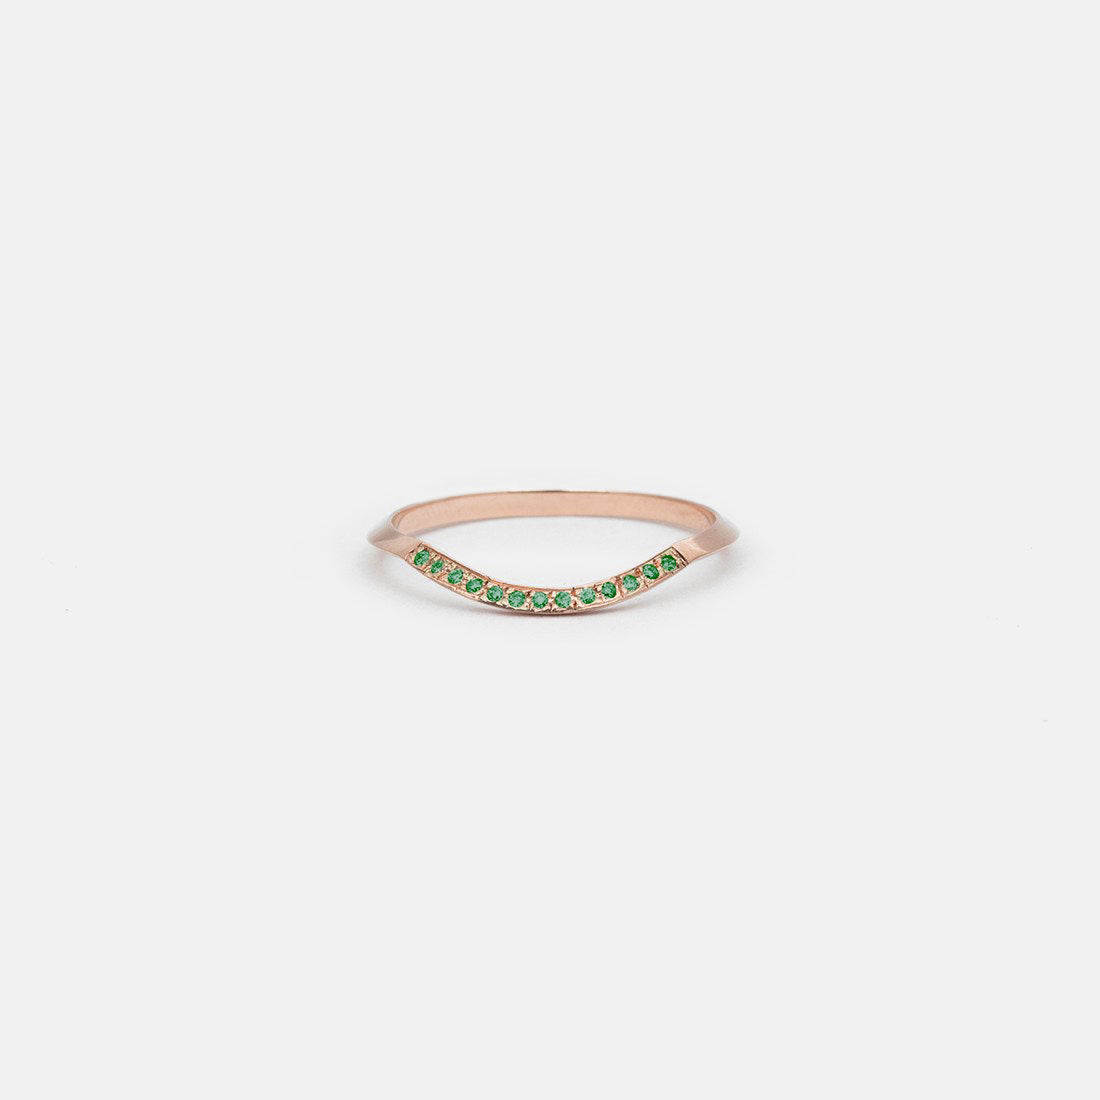 Arba Thin Ring in 14k Rose Gold set with Emeralds By SHW Fine Jewelry New York City